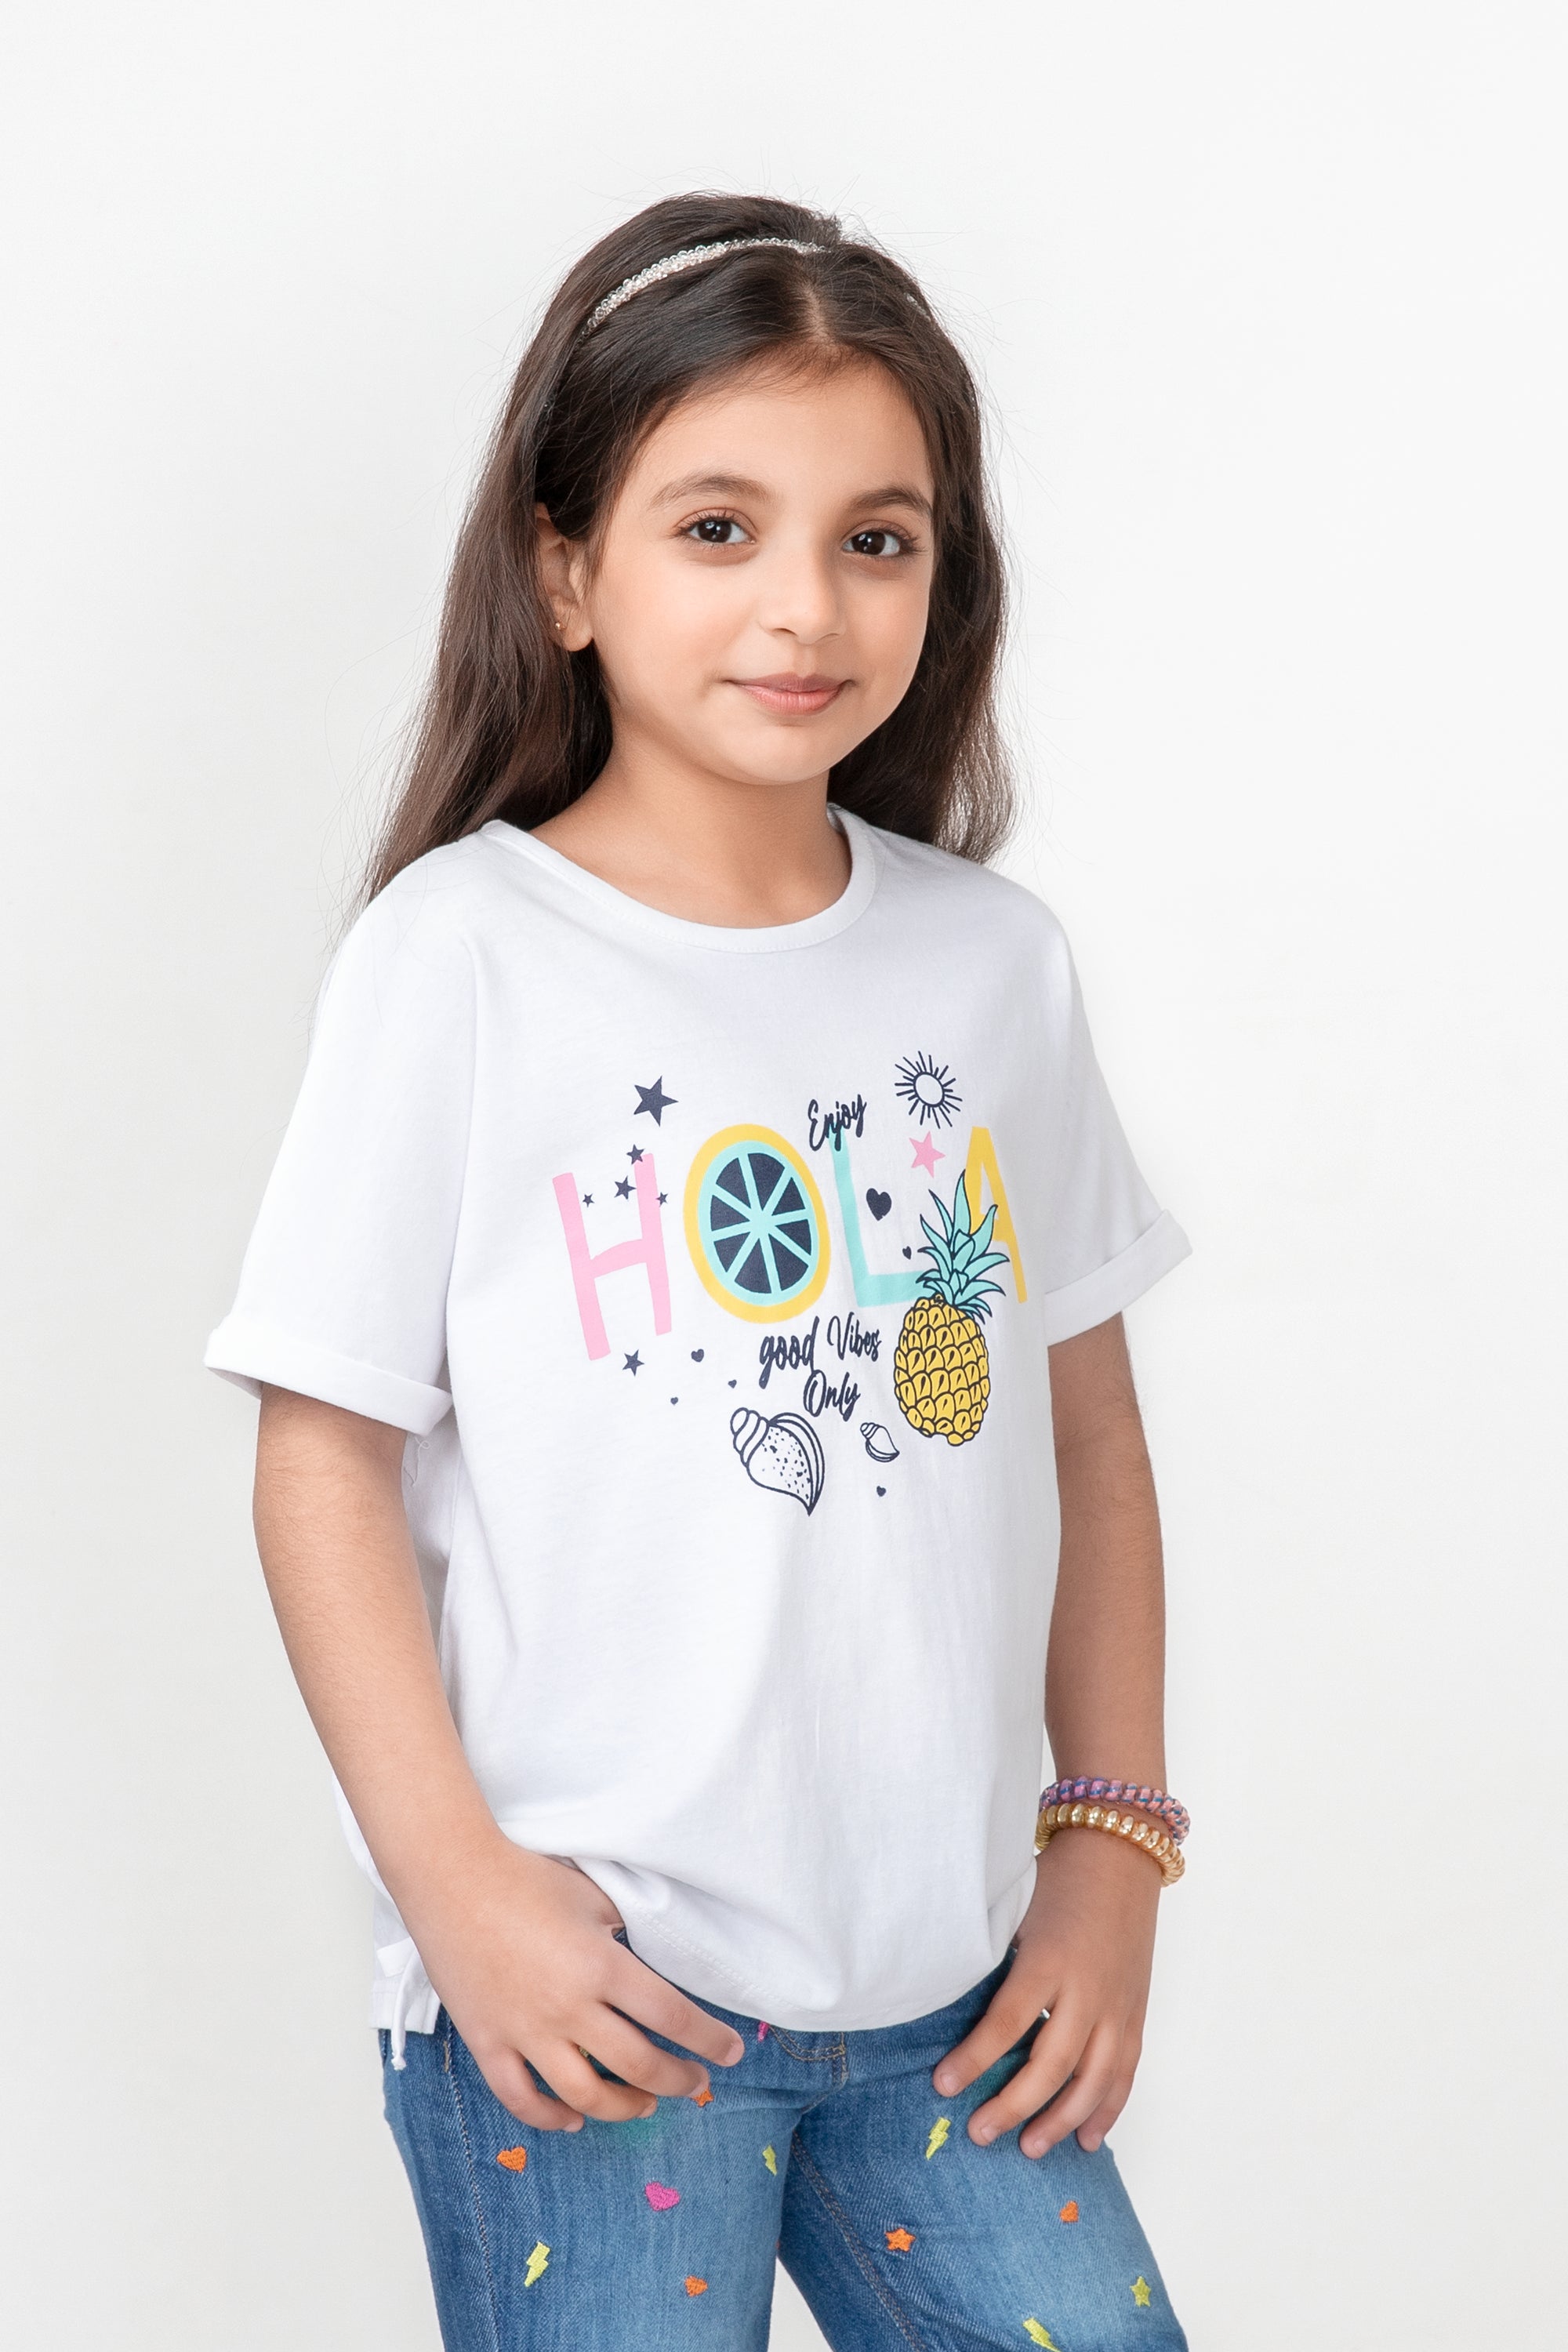 Girls 'Good Vibes Only' Boxy T-shirt